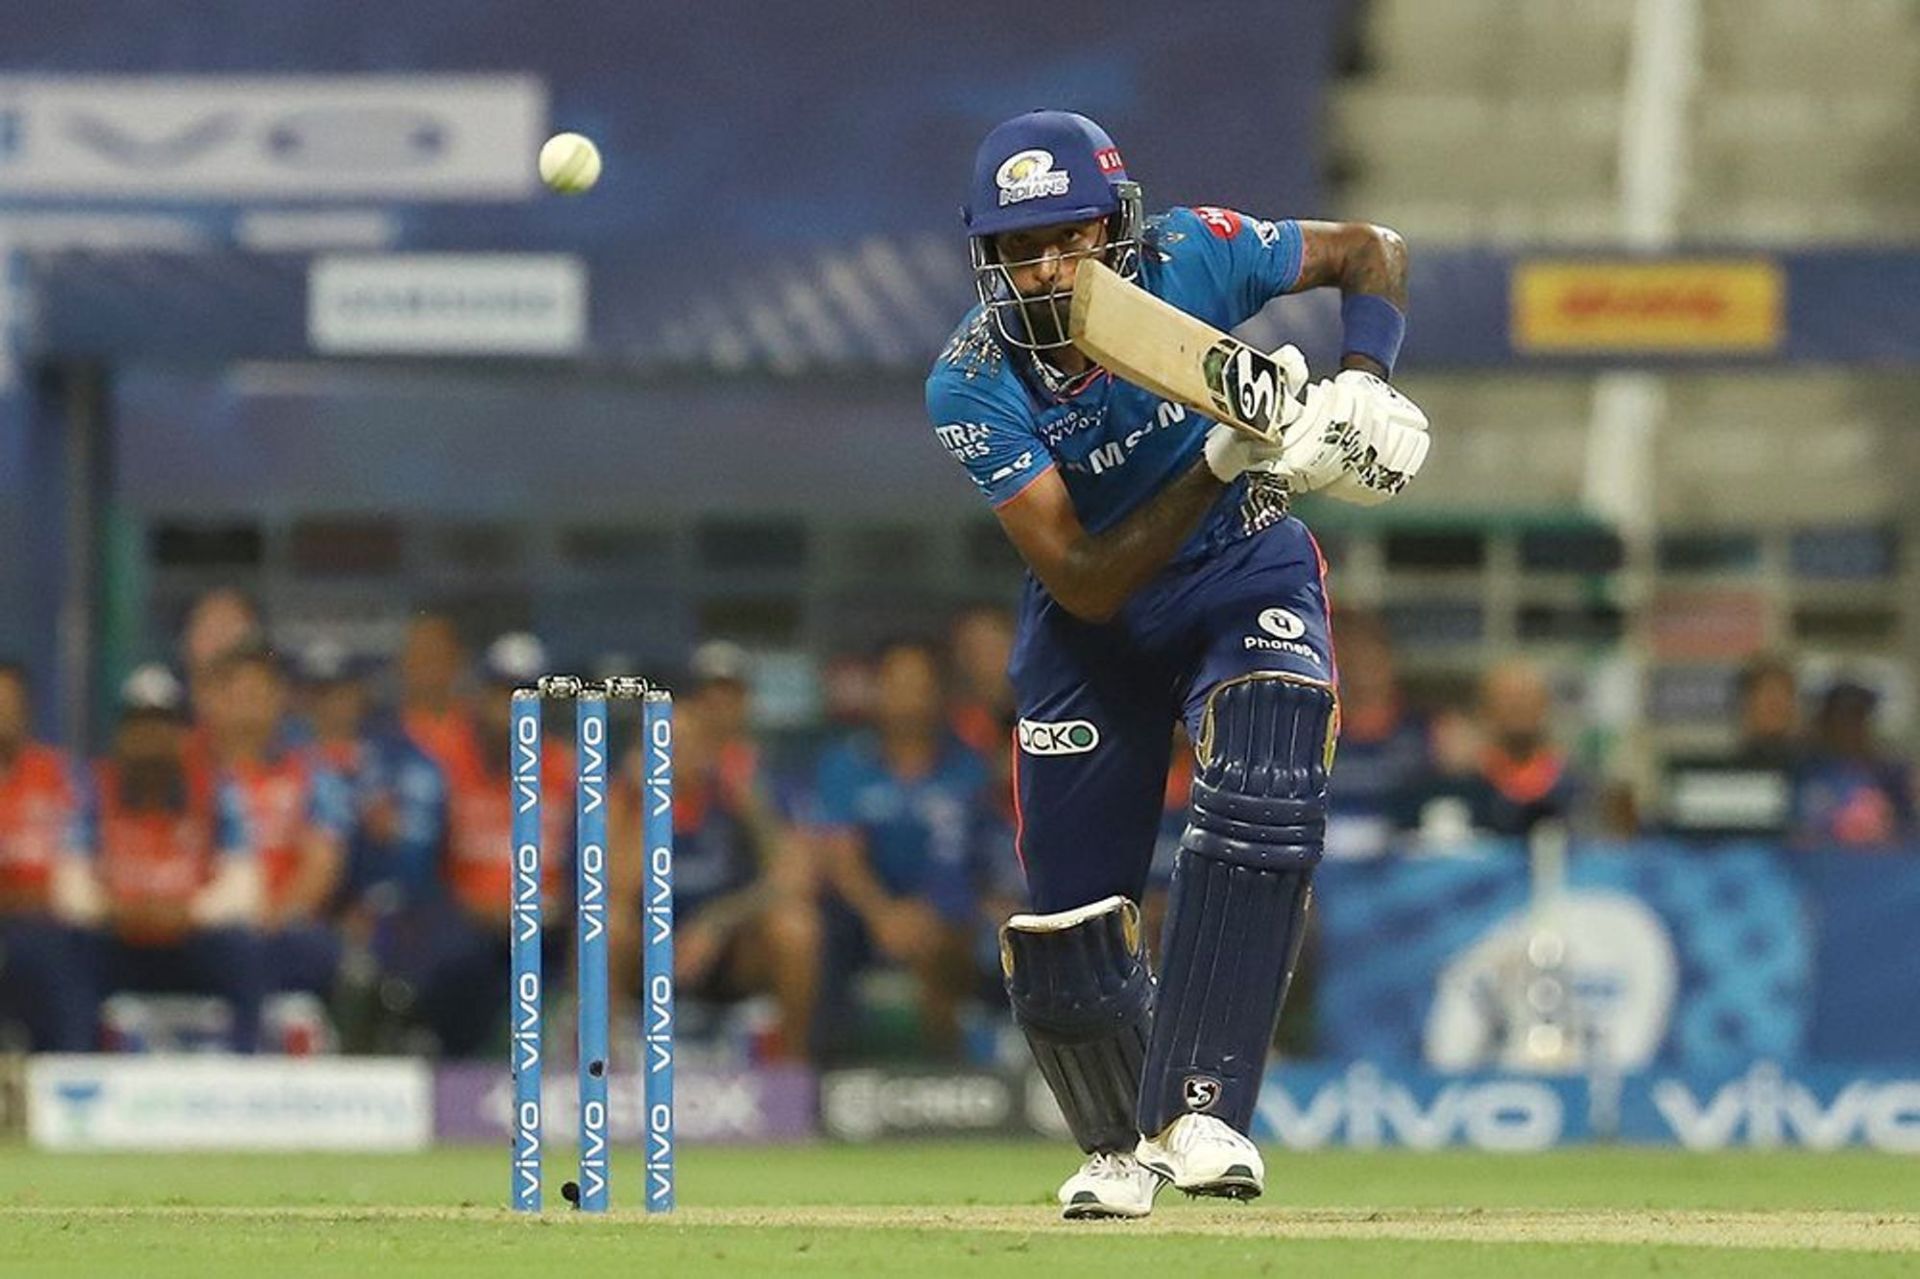 Hardik Pandya was found wanting with the bat as well in IPL 2021 [P/C: iplt20.com]